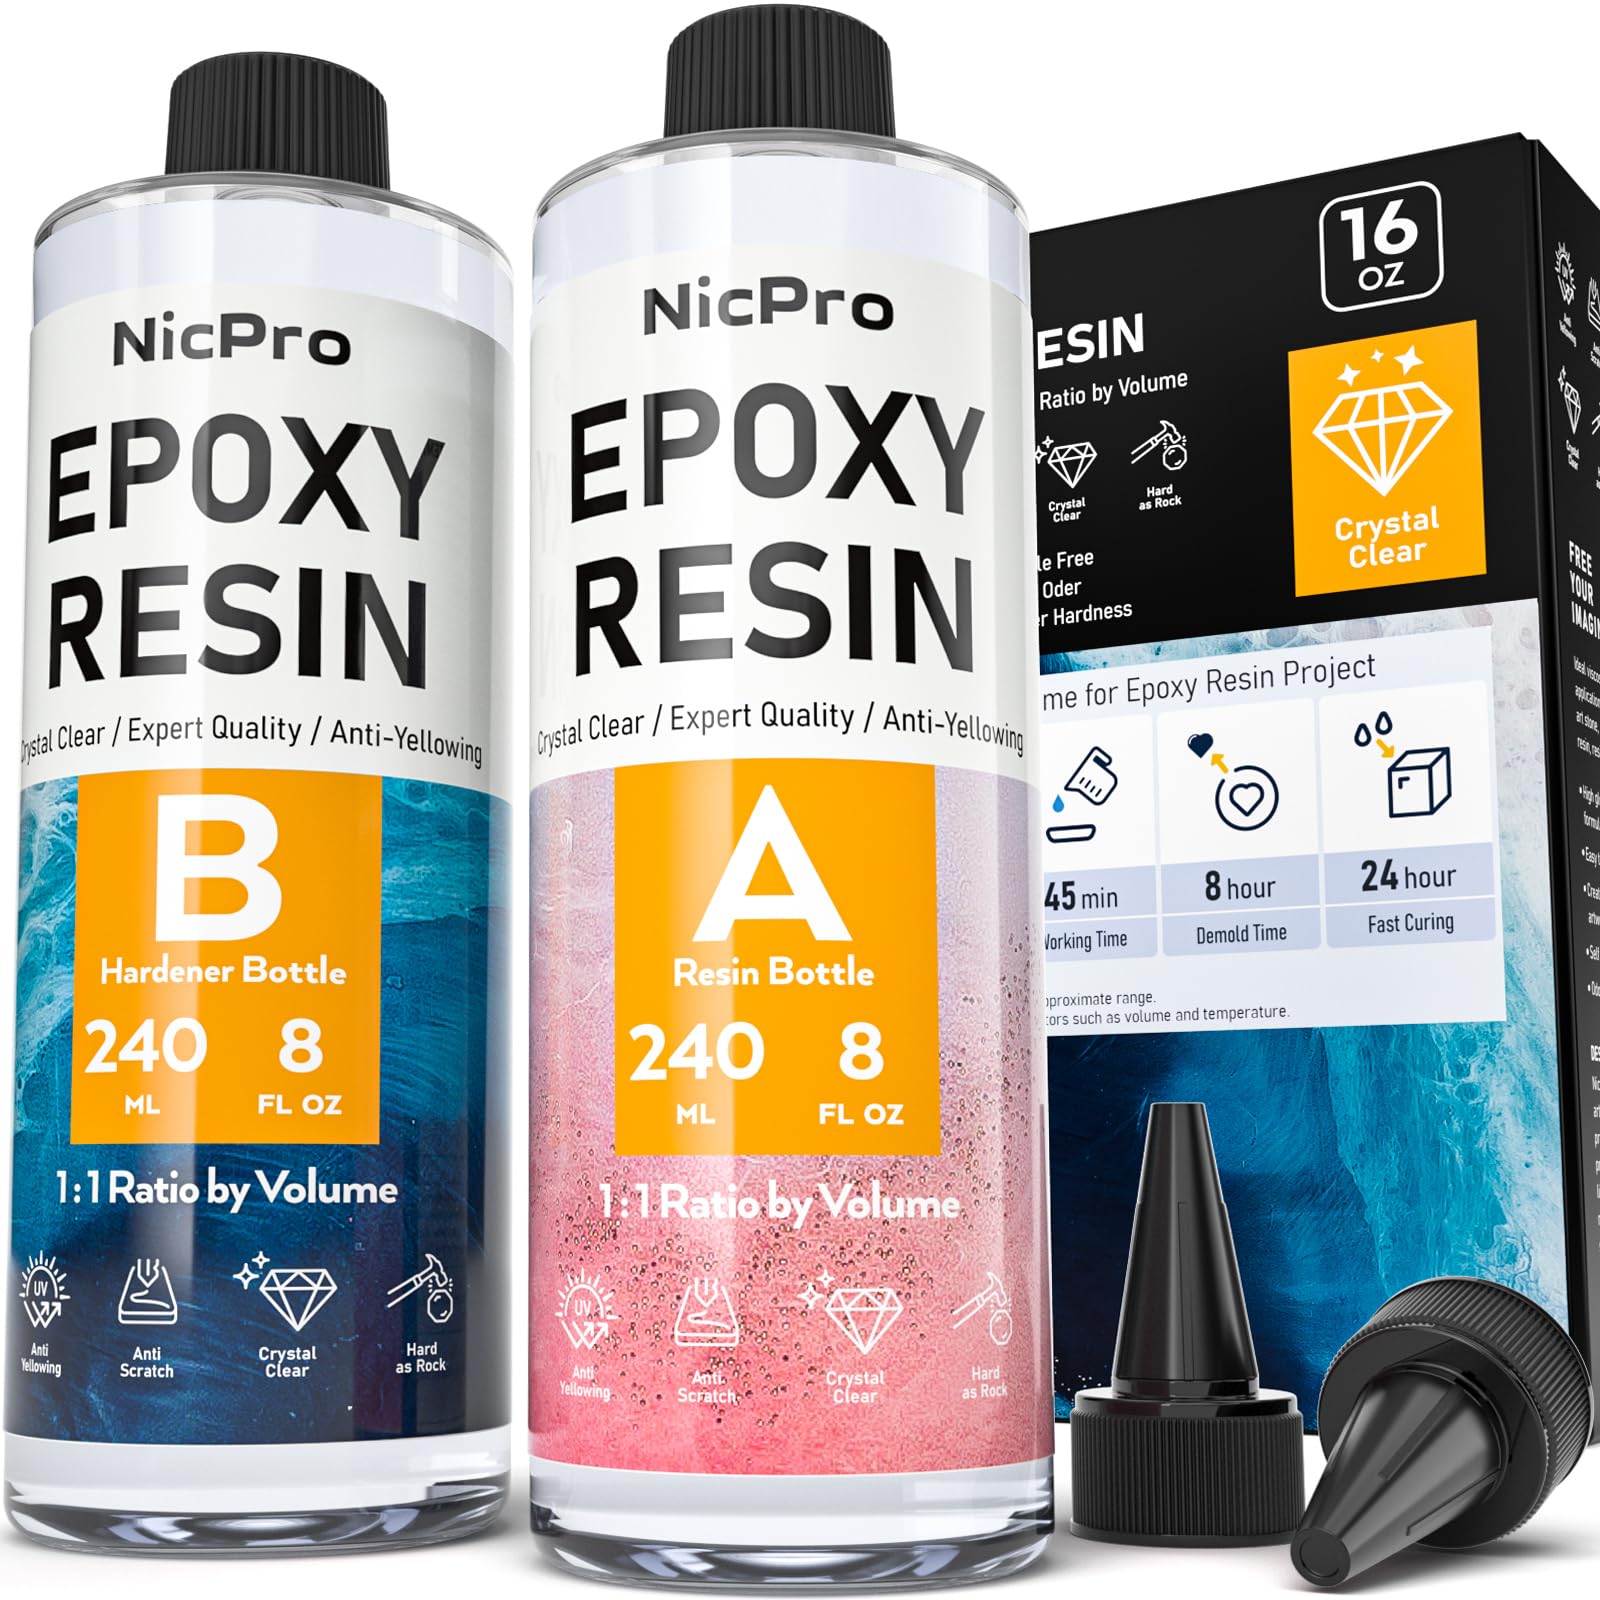 Epoxy Resin Kit for Beginners - 15.5 FL.OZ. Crystal Clear Casting and  Coating Epoxy Resin for Jewelry Making, Art, Crafts, Tumblers, River  Tables, UV